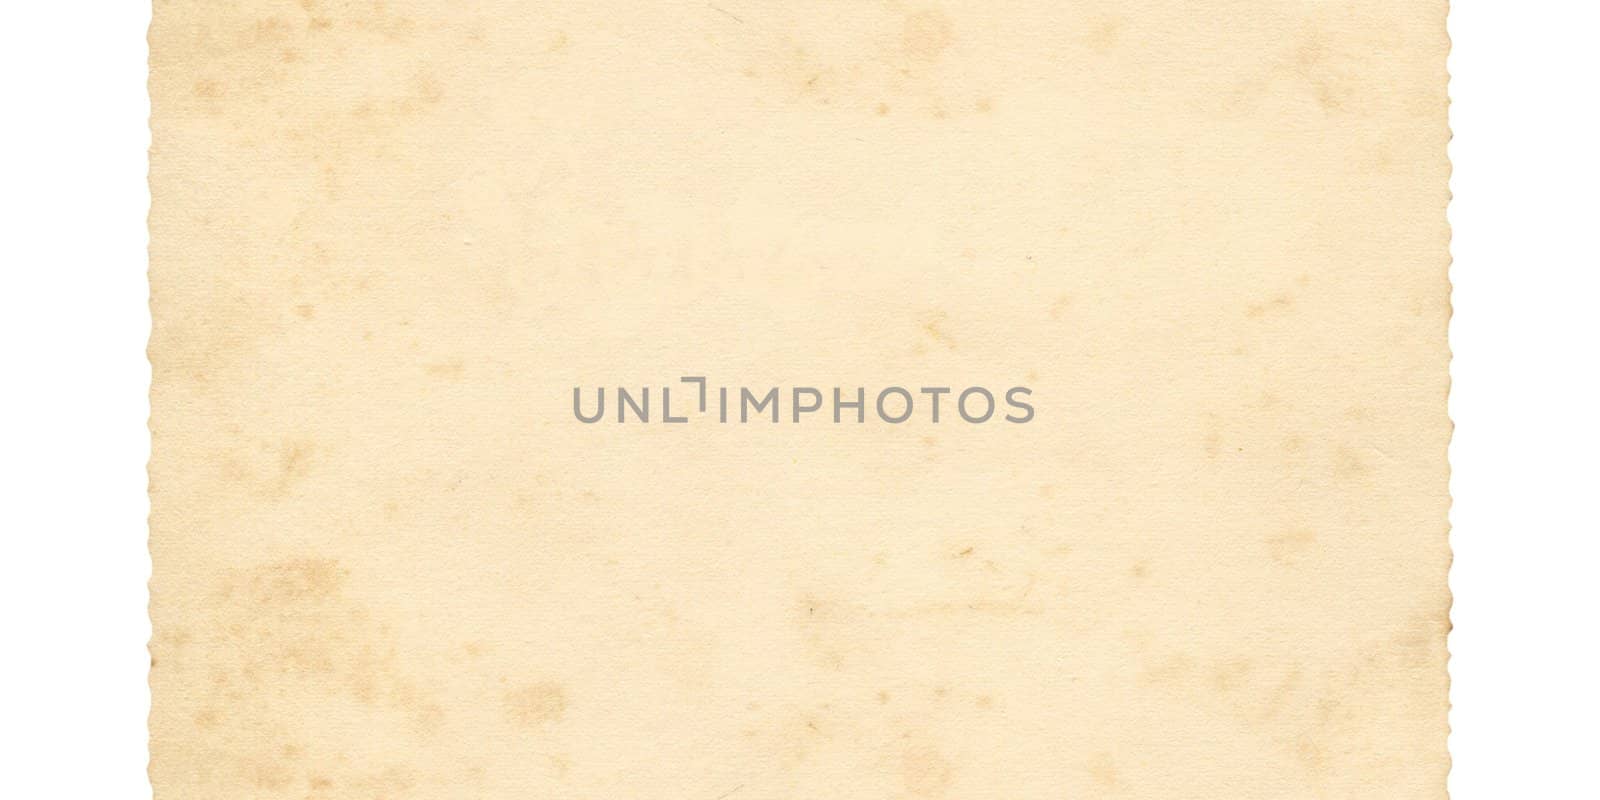 A blank postcard useful as a background - isolated over white background